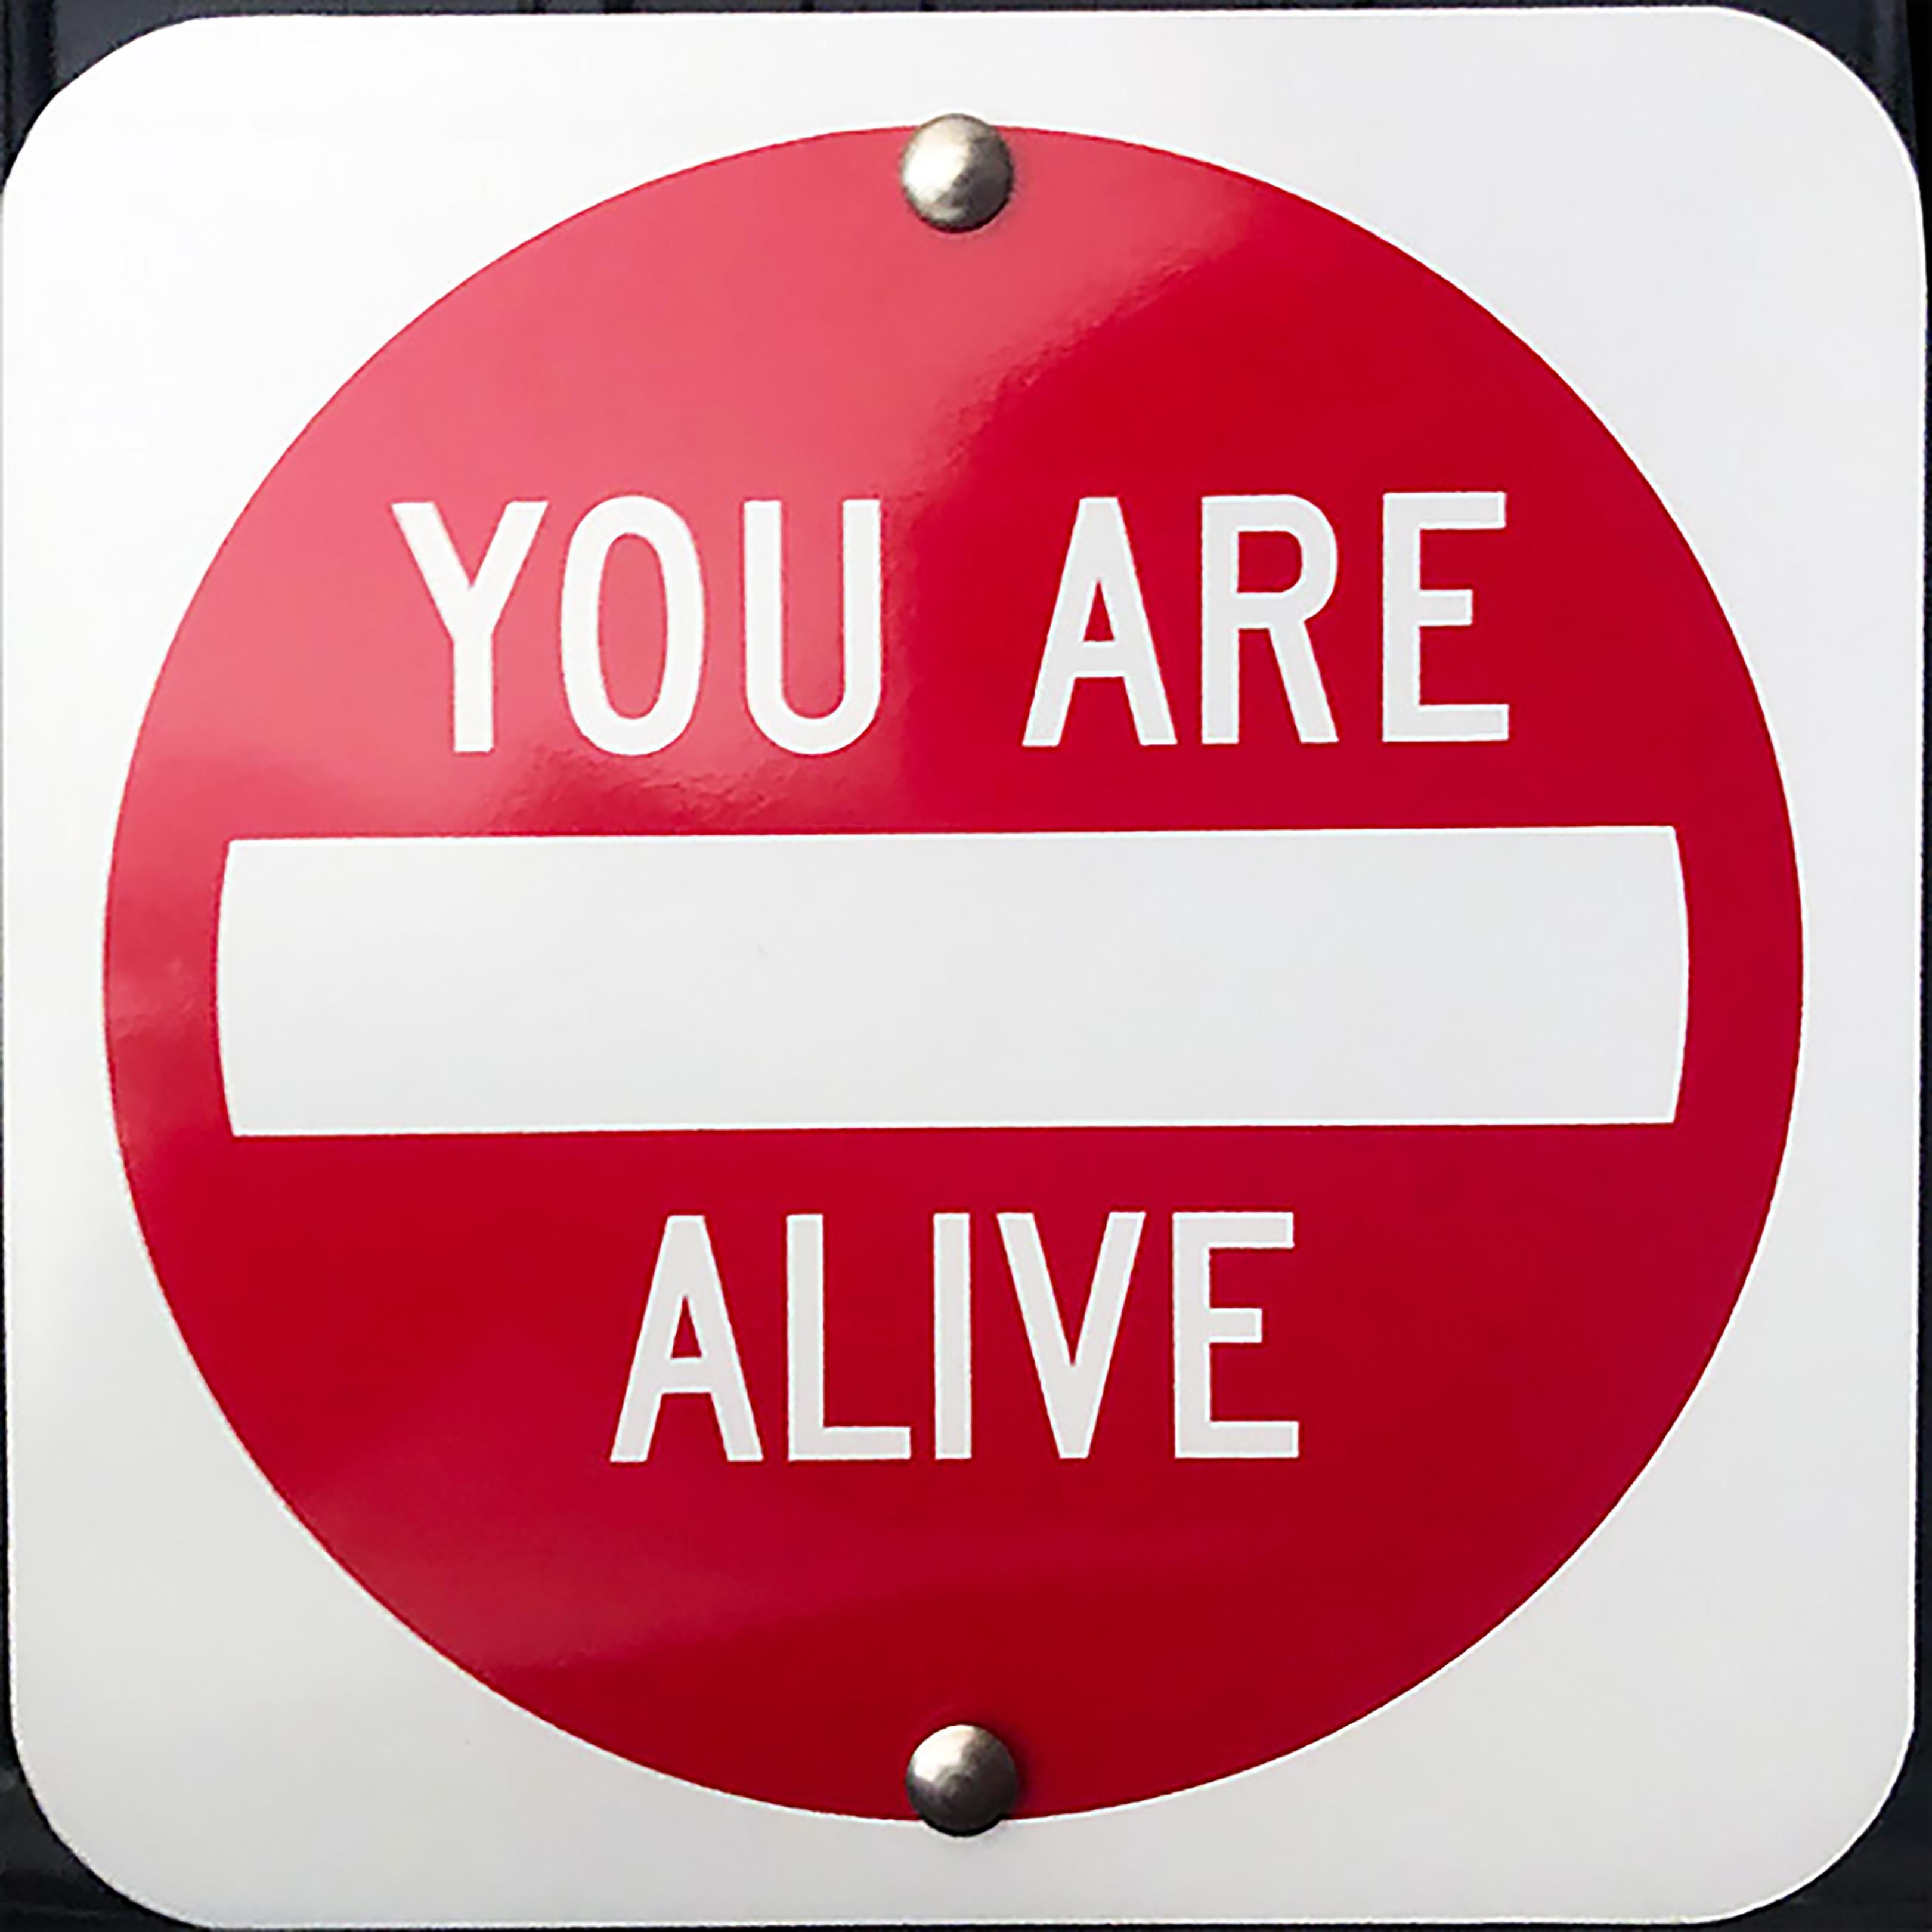 "You Are Alive" - Contemporary Street Sign Sculpture